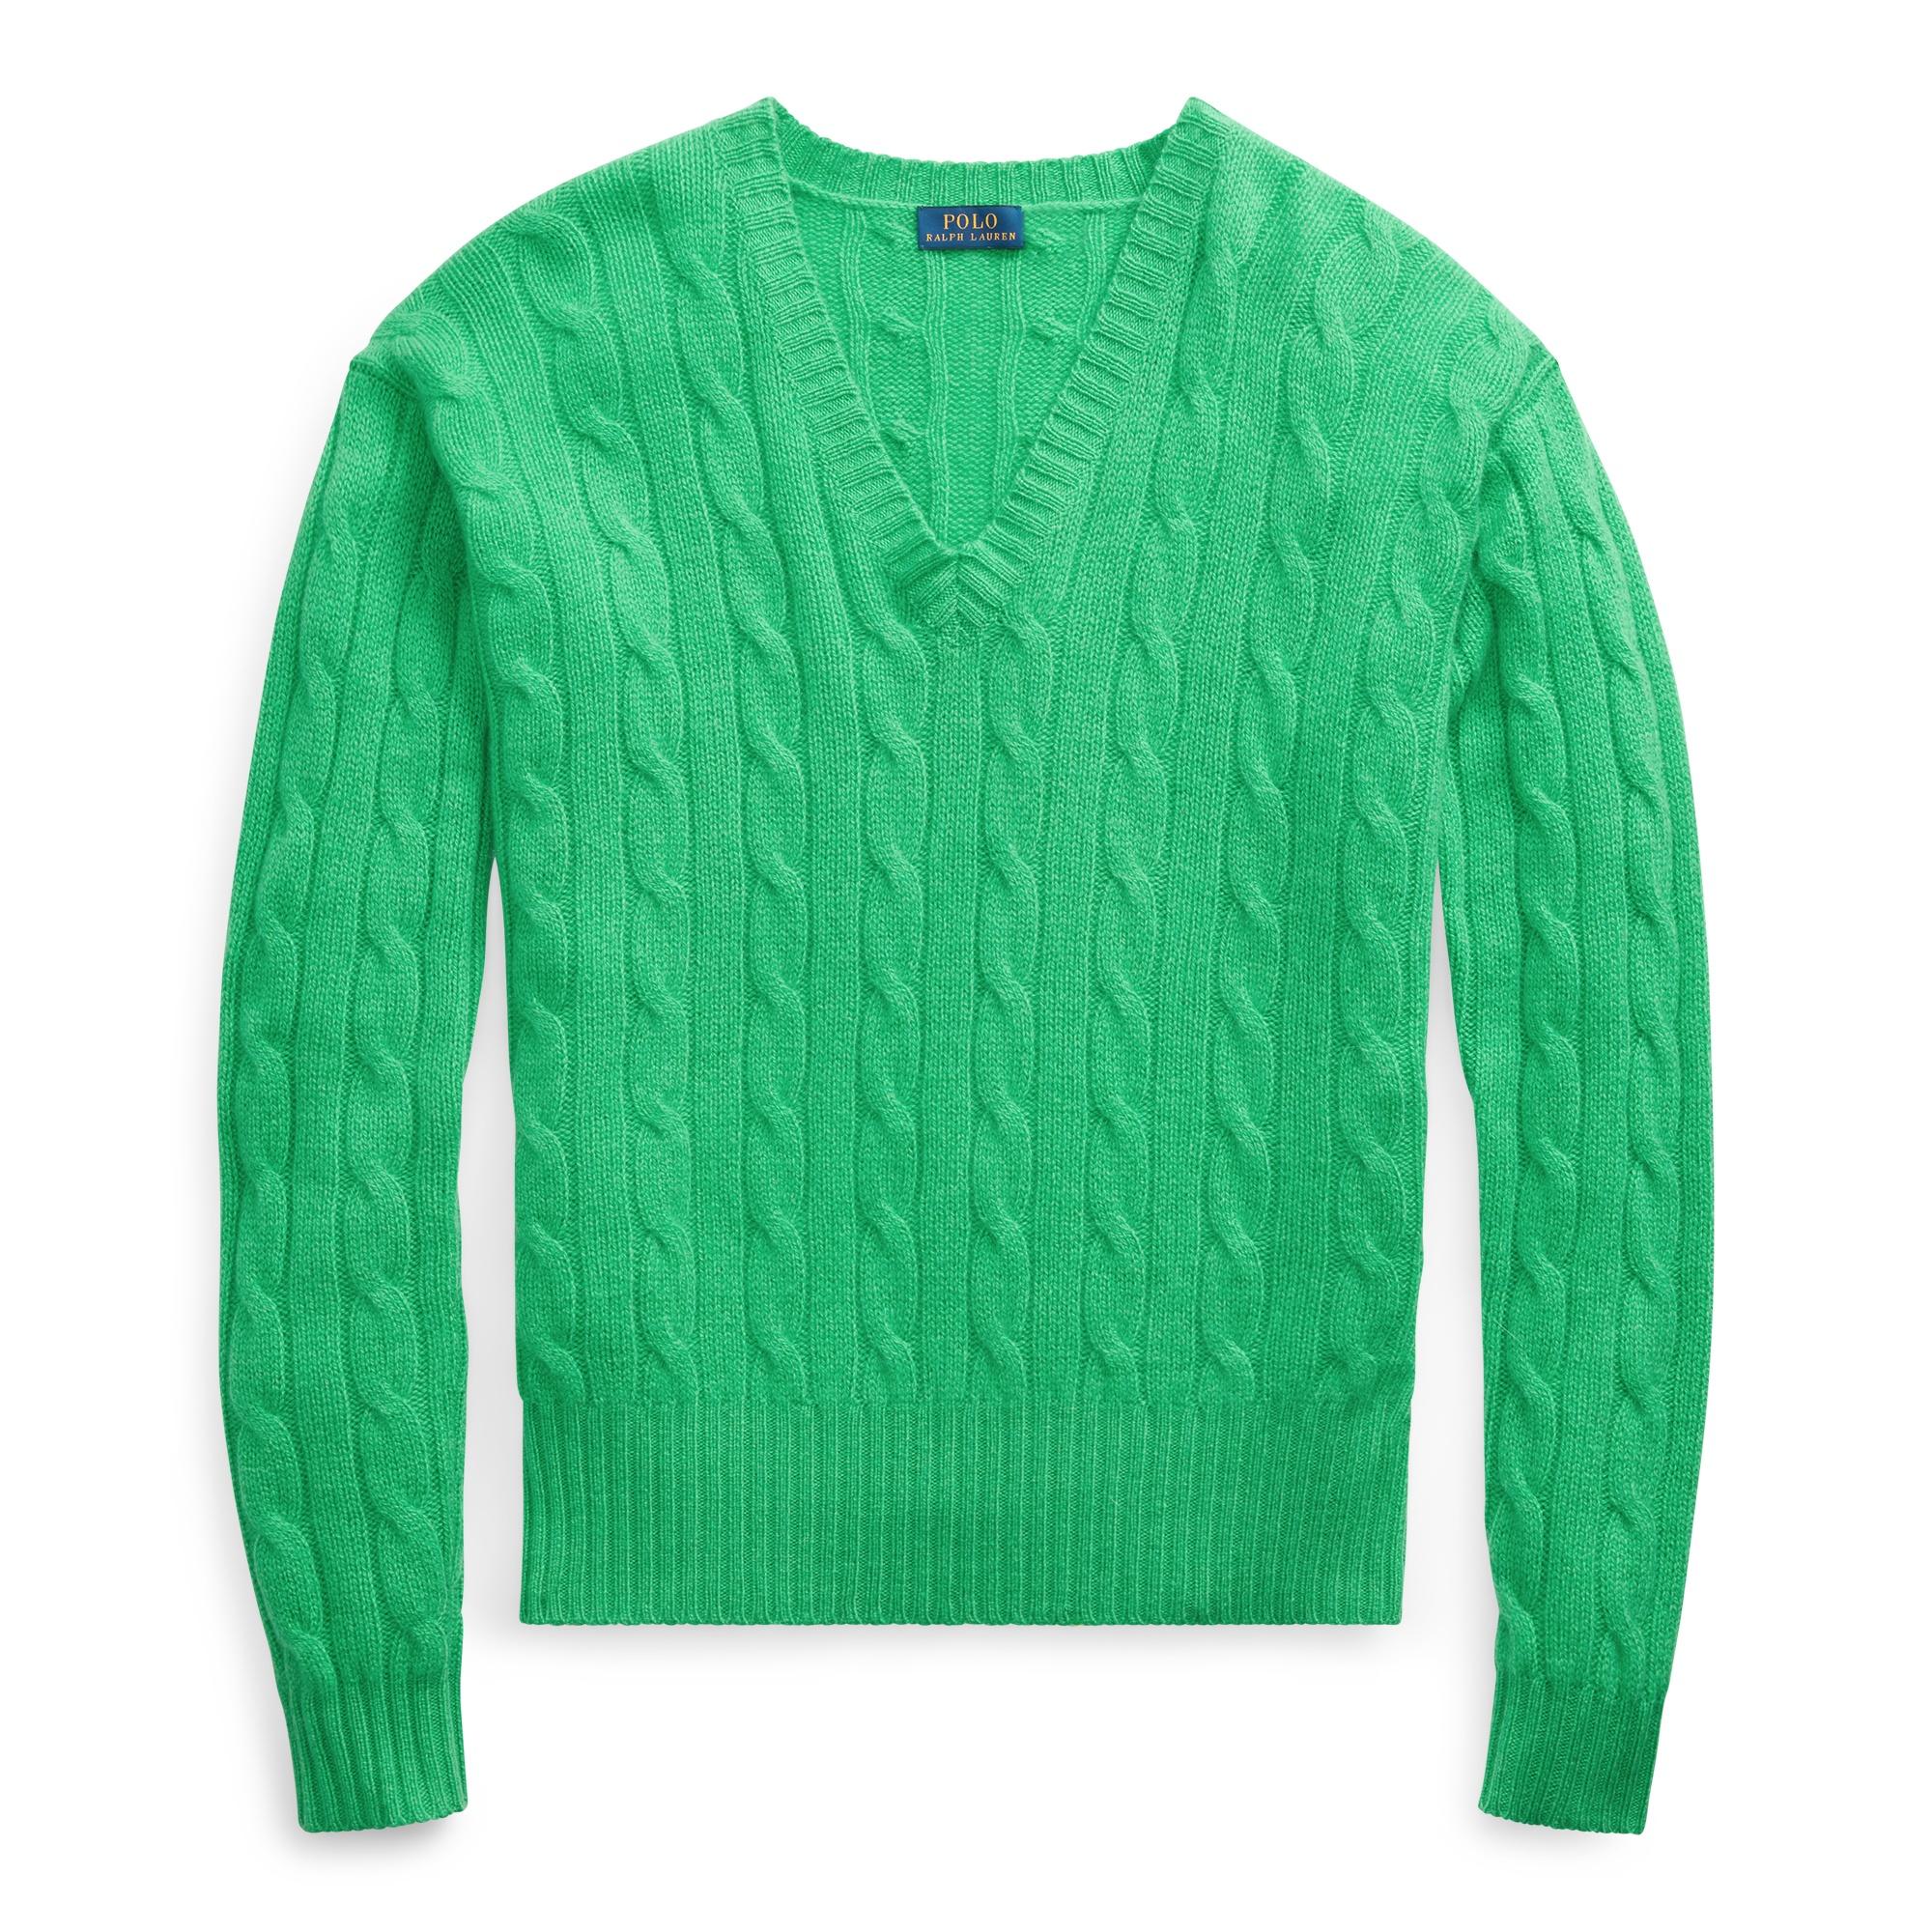 Ralph Lauren Cable-knit Cashmere Sweater in Green - Lyst